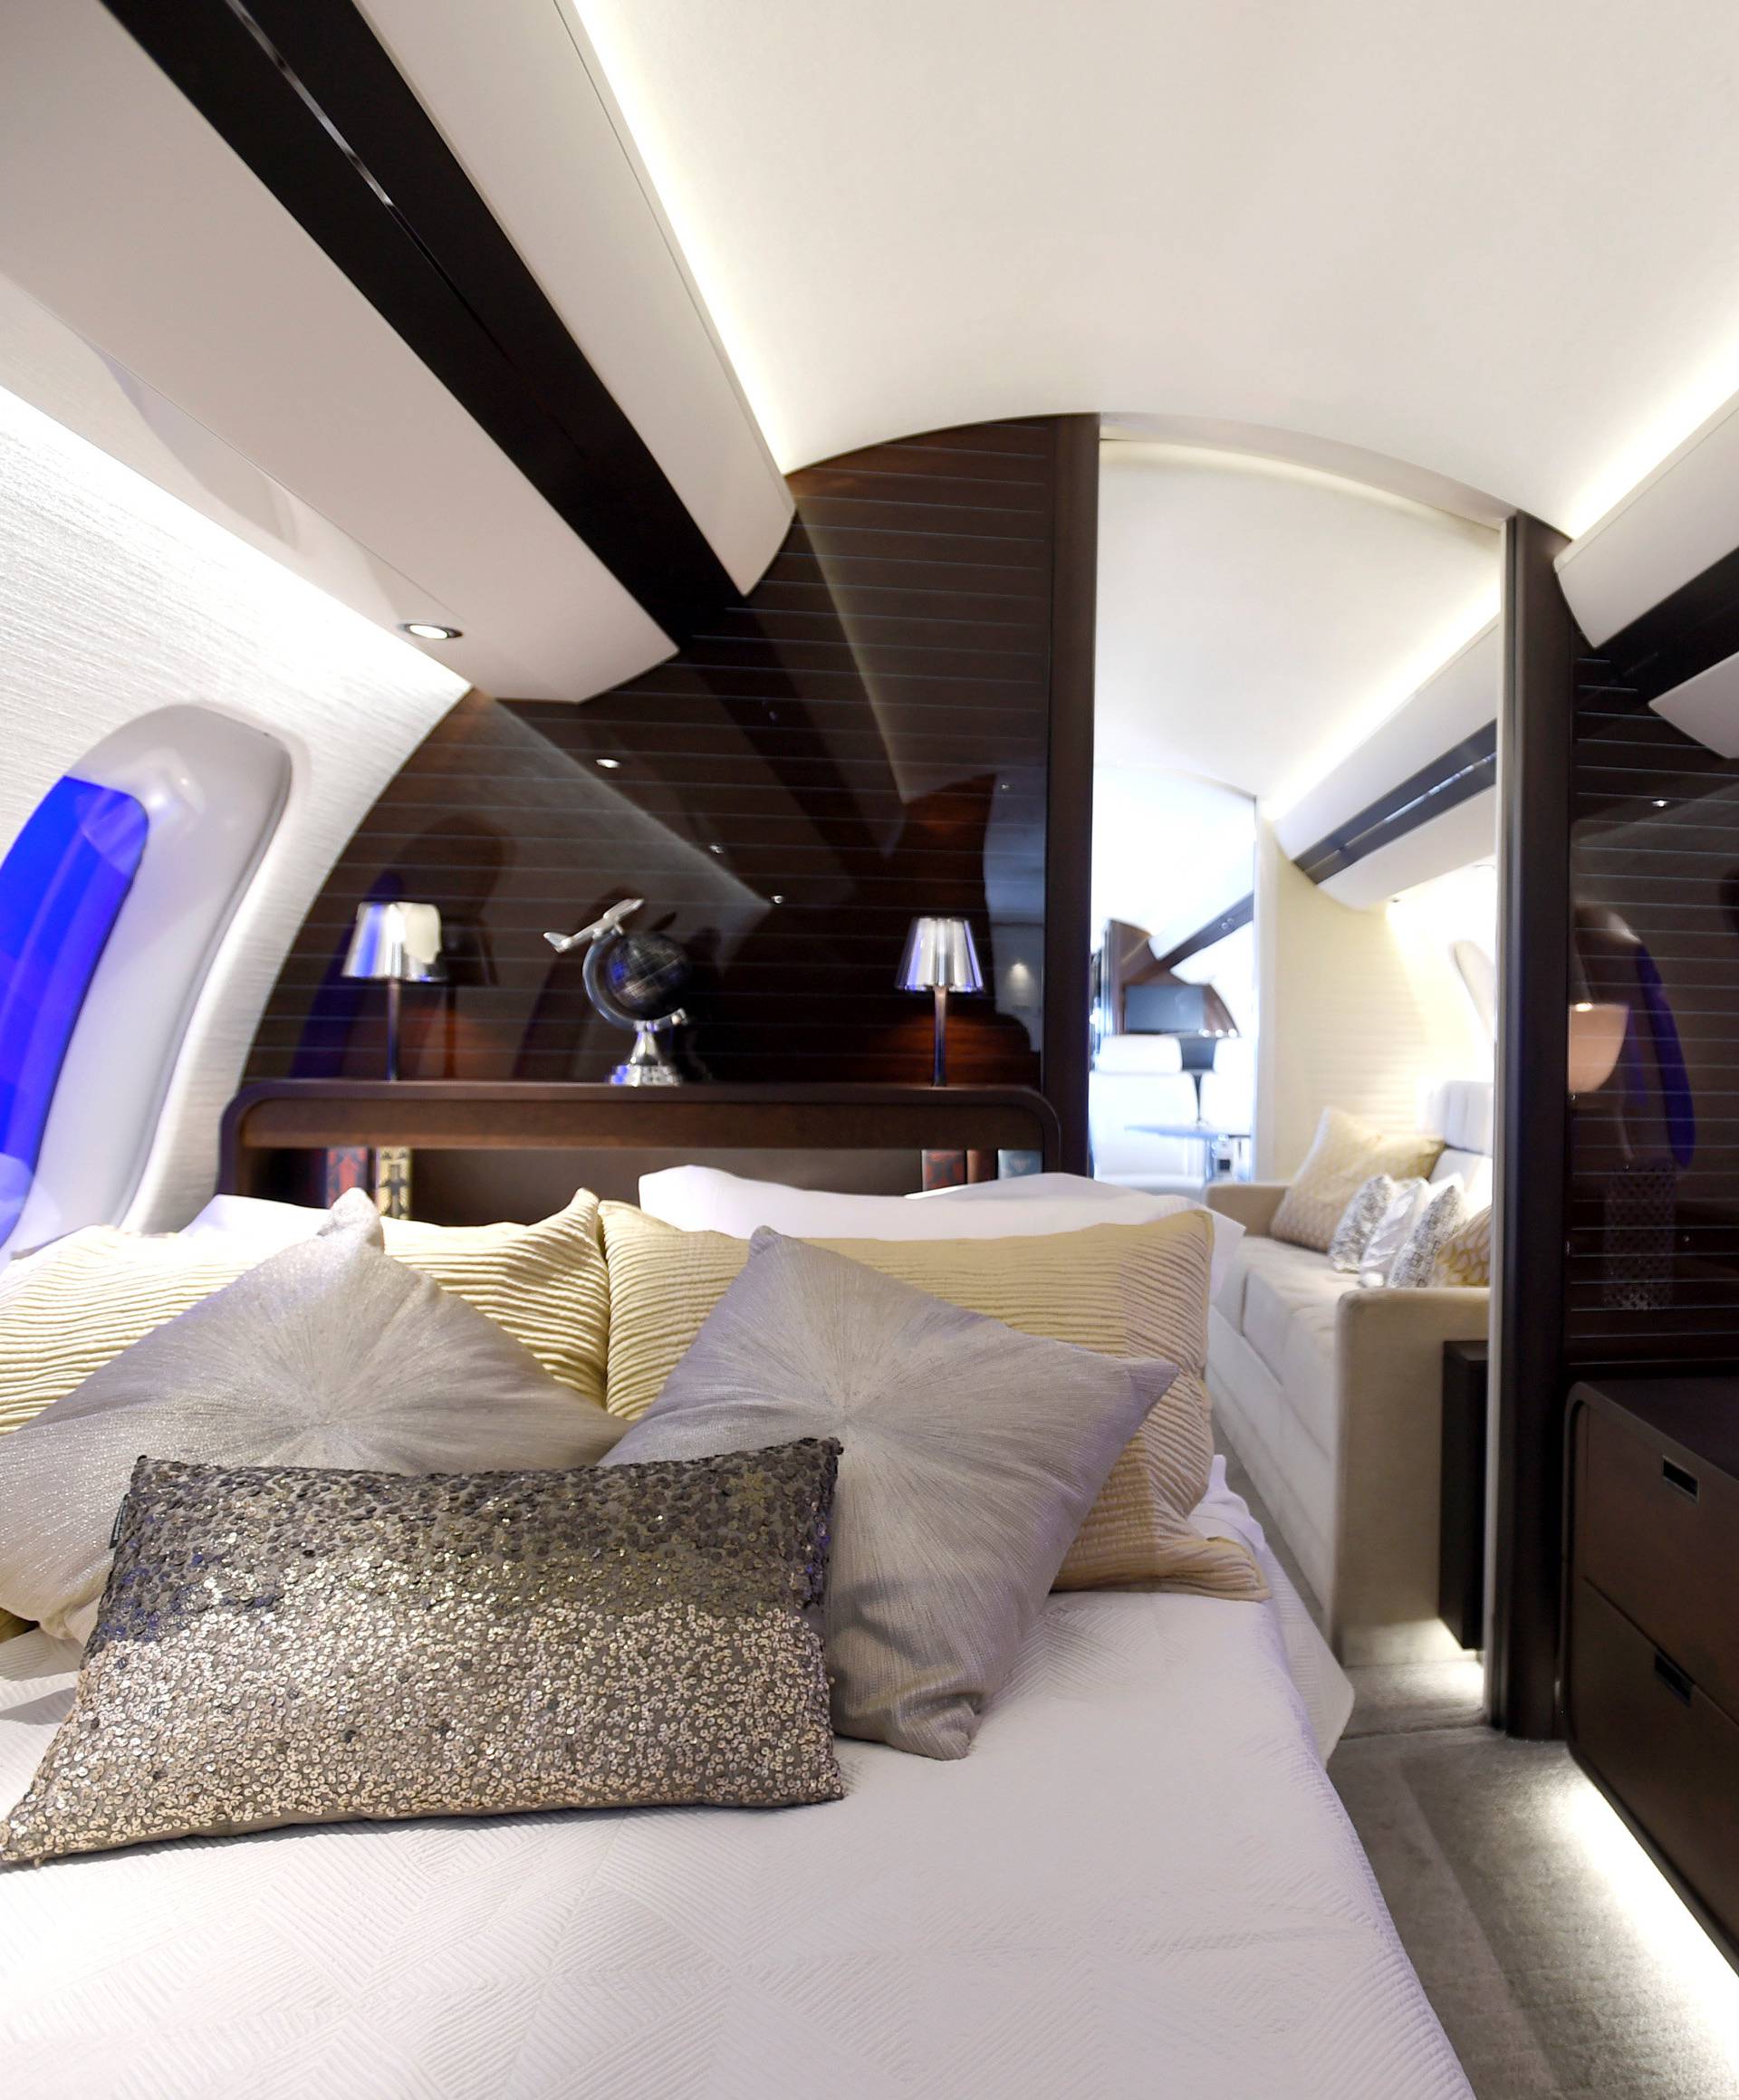 An interior view of a mock-up Bombardier Global 7000 business jet is seen during the National Business Aviation Association at the Henderson Executive Airport in Henderson